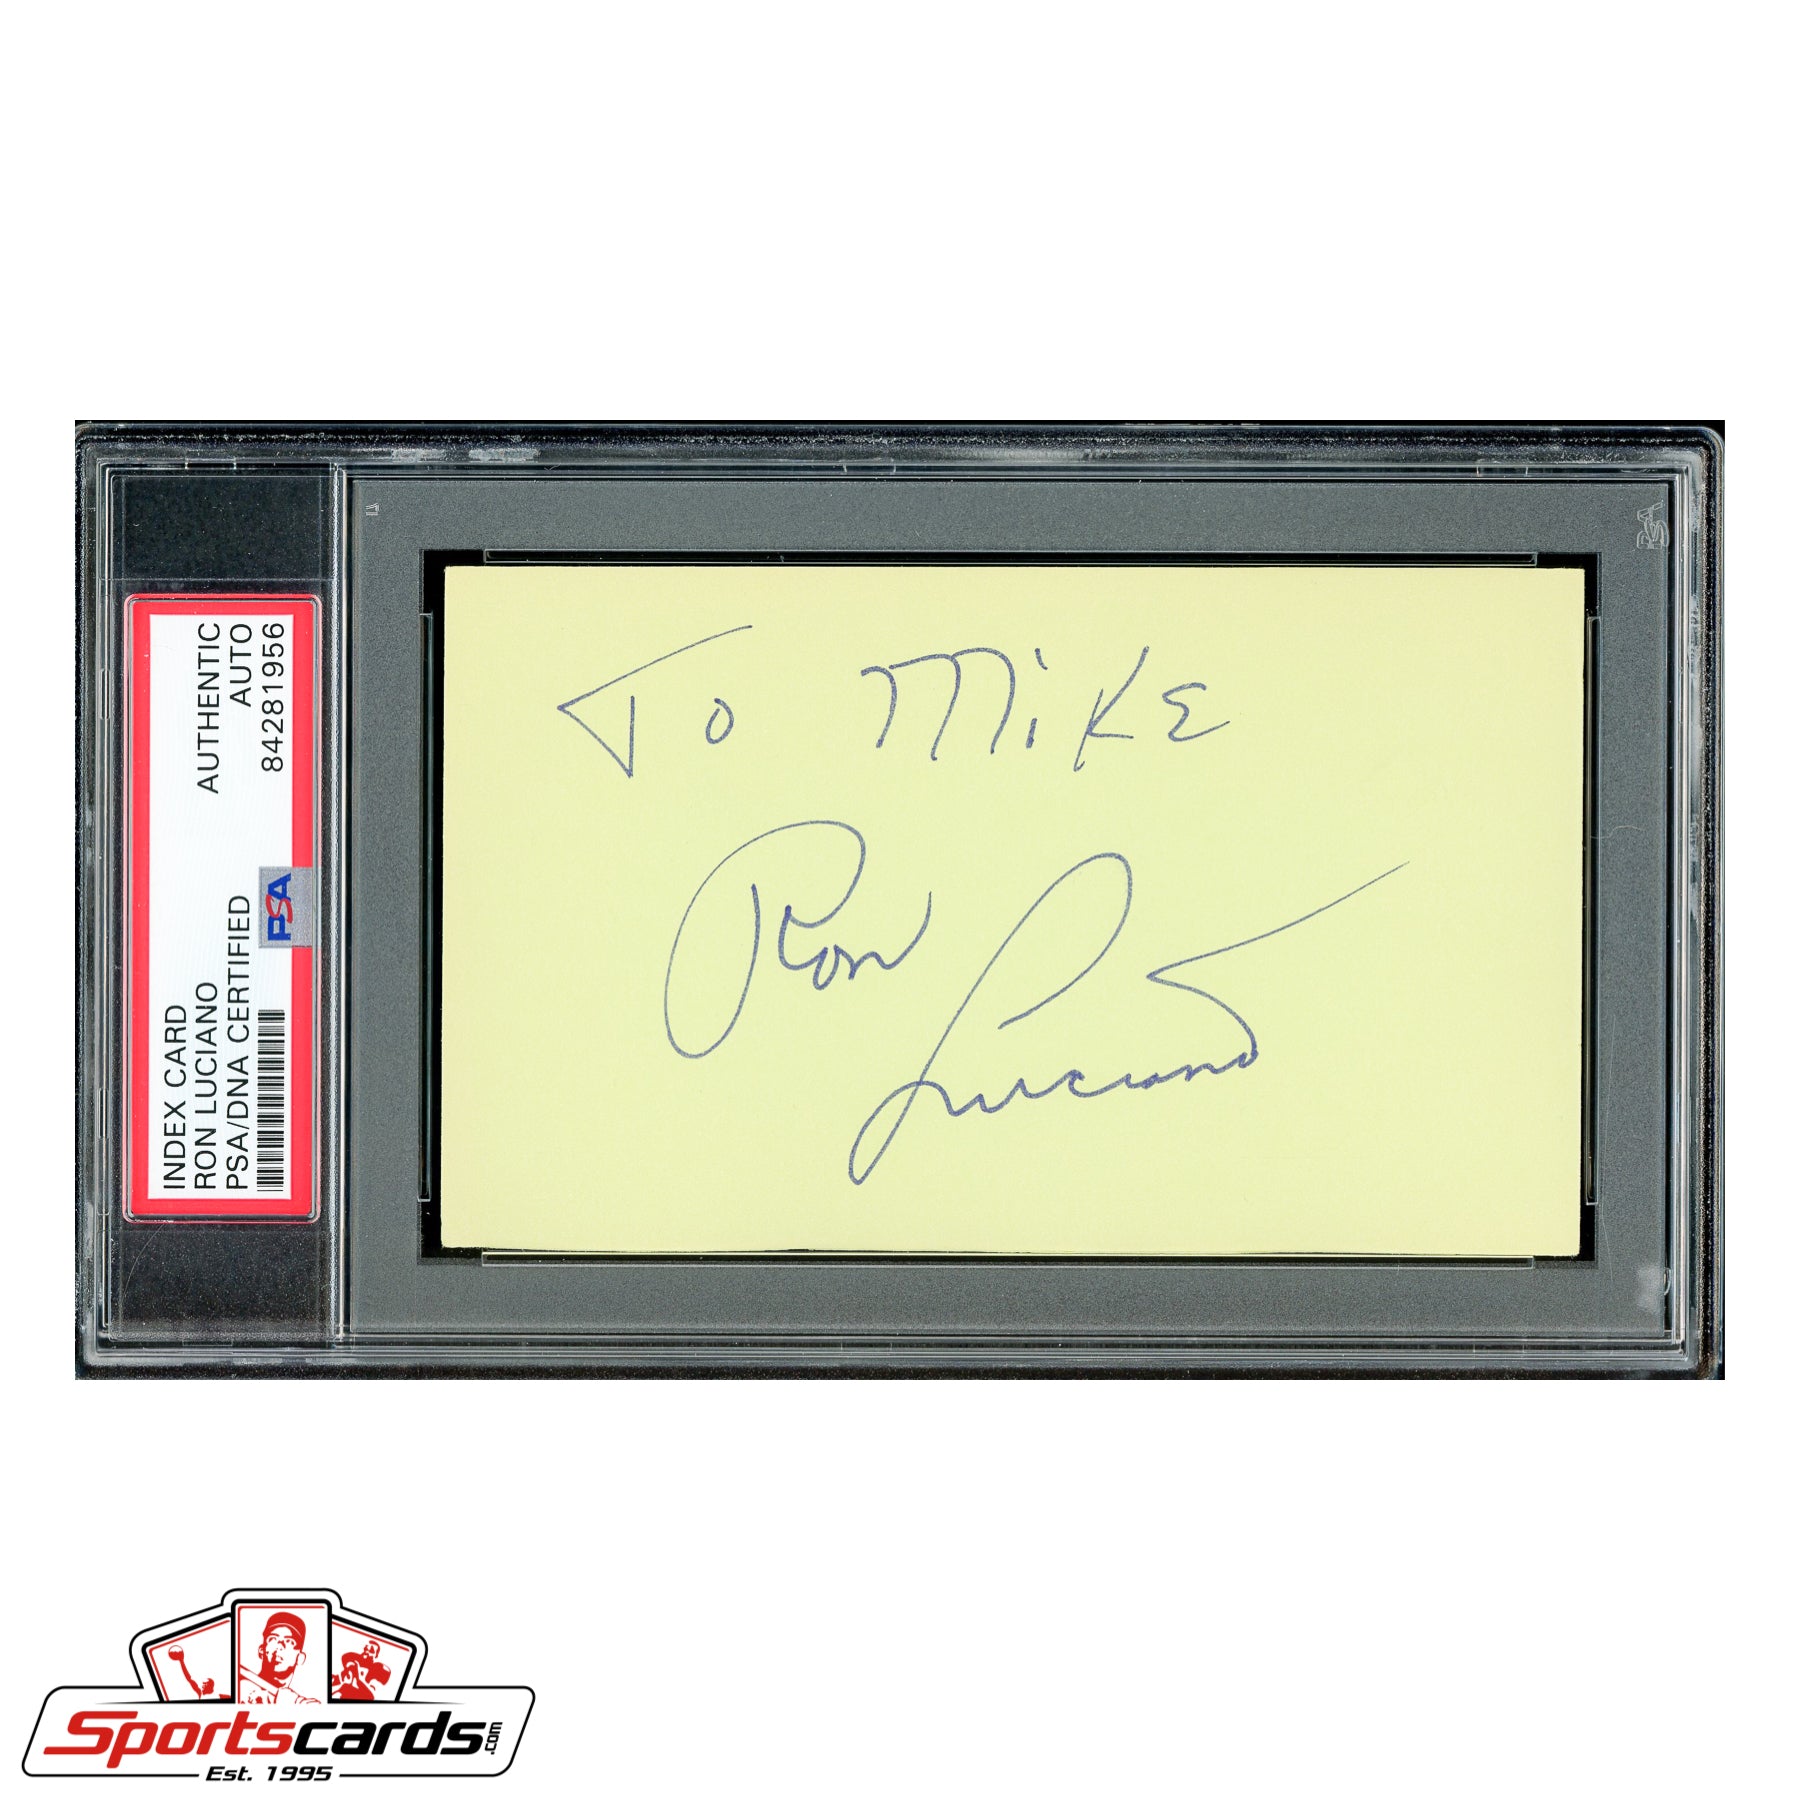 Ron Luciano Signed Auto 3x5 Index Card - PSA/DNA